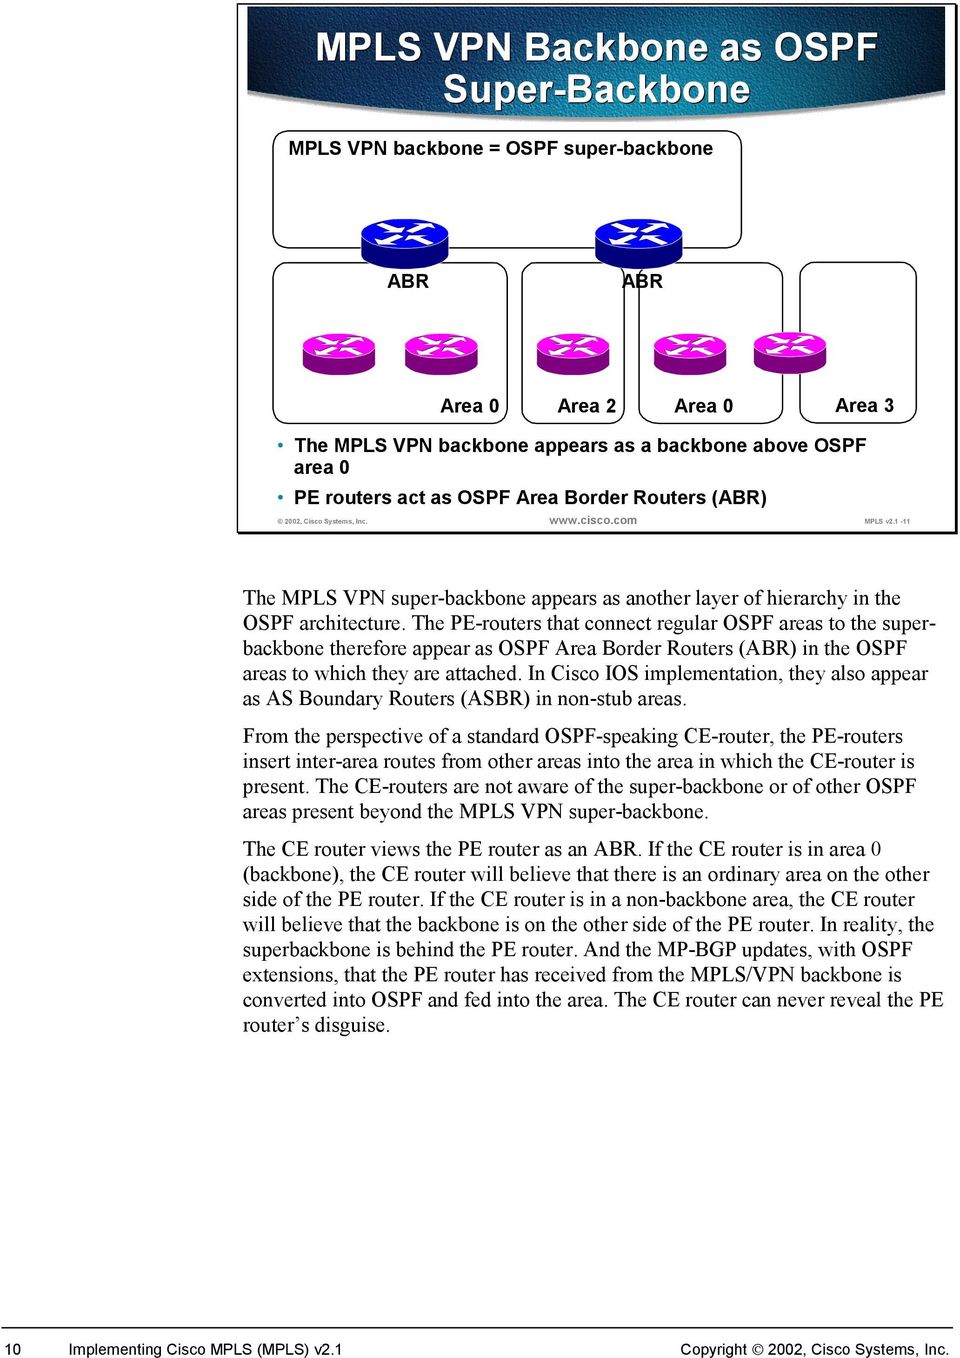 The s that connect regular OSPF areas to the superbackbone therefore appear as OSPF Area Border Routers (ABR) in the OSPF areas to which they are attached.